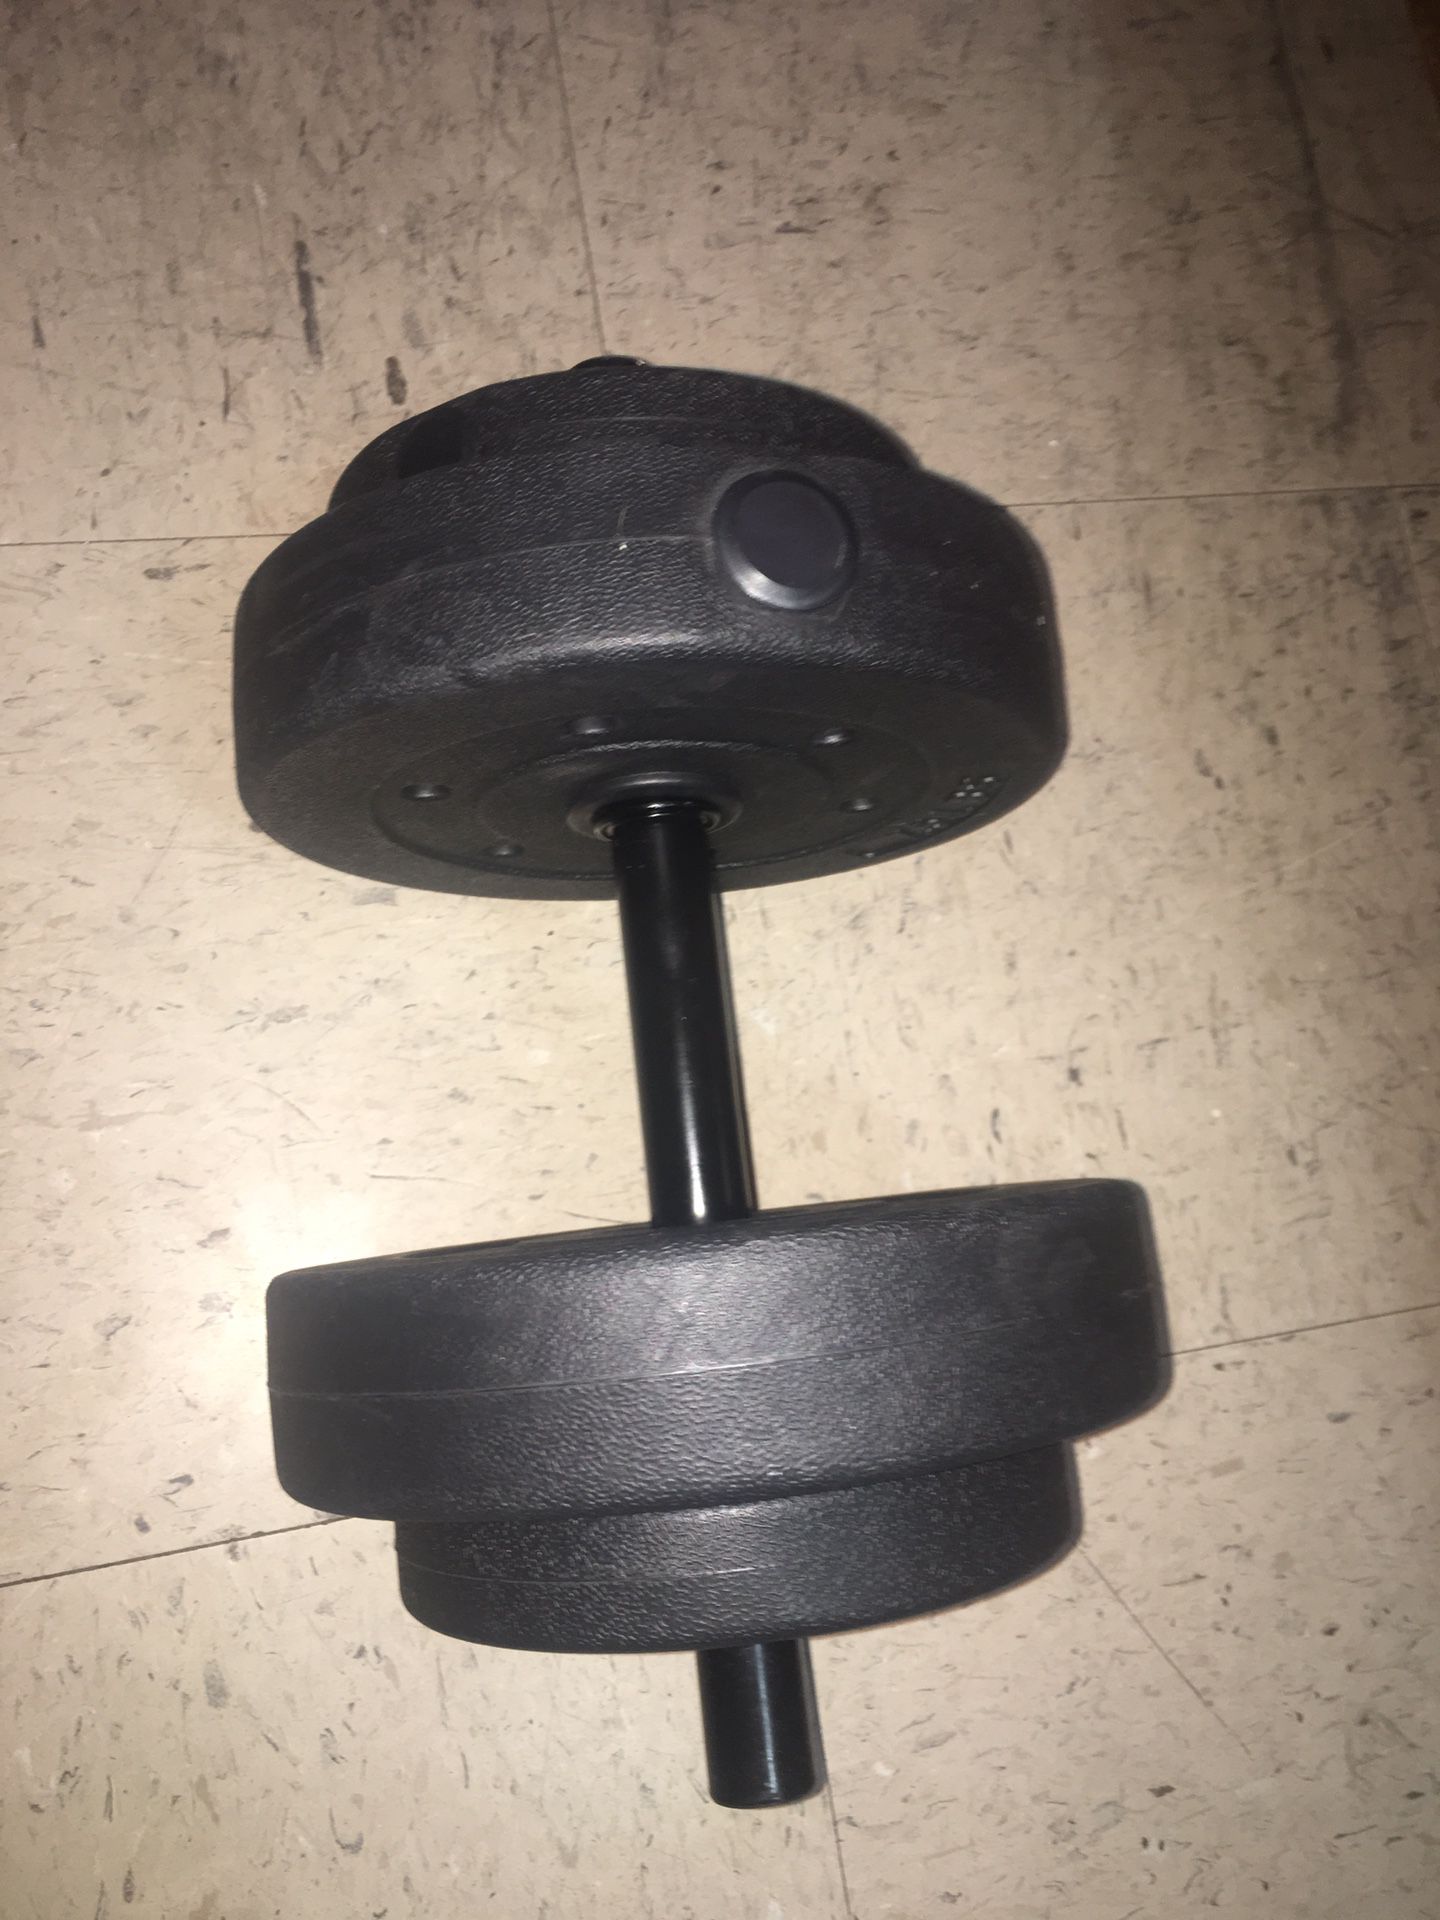 Golds gym weights